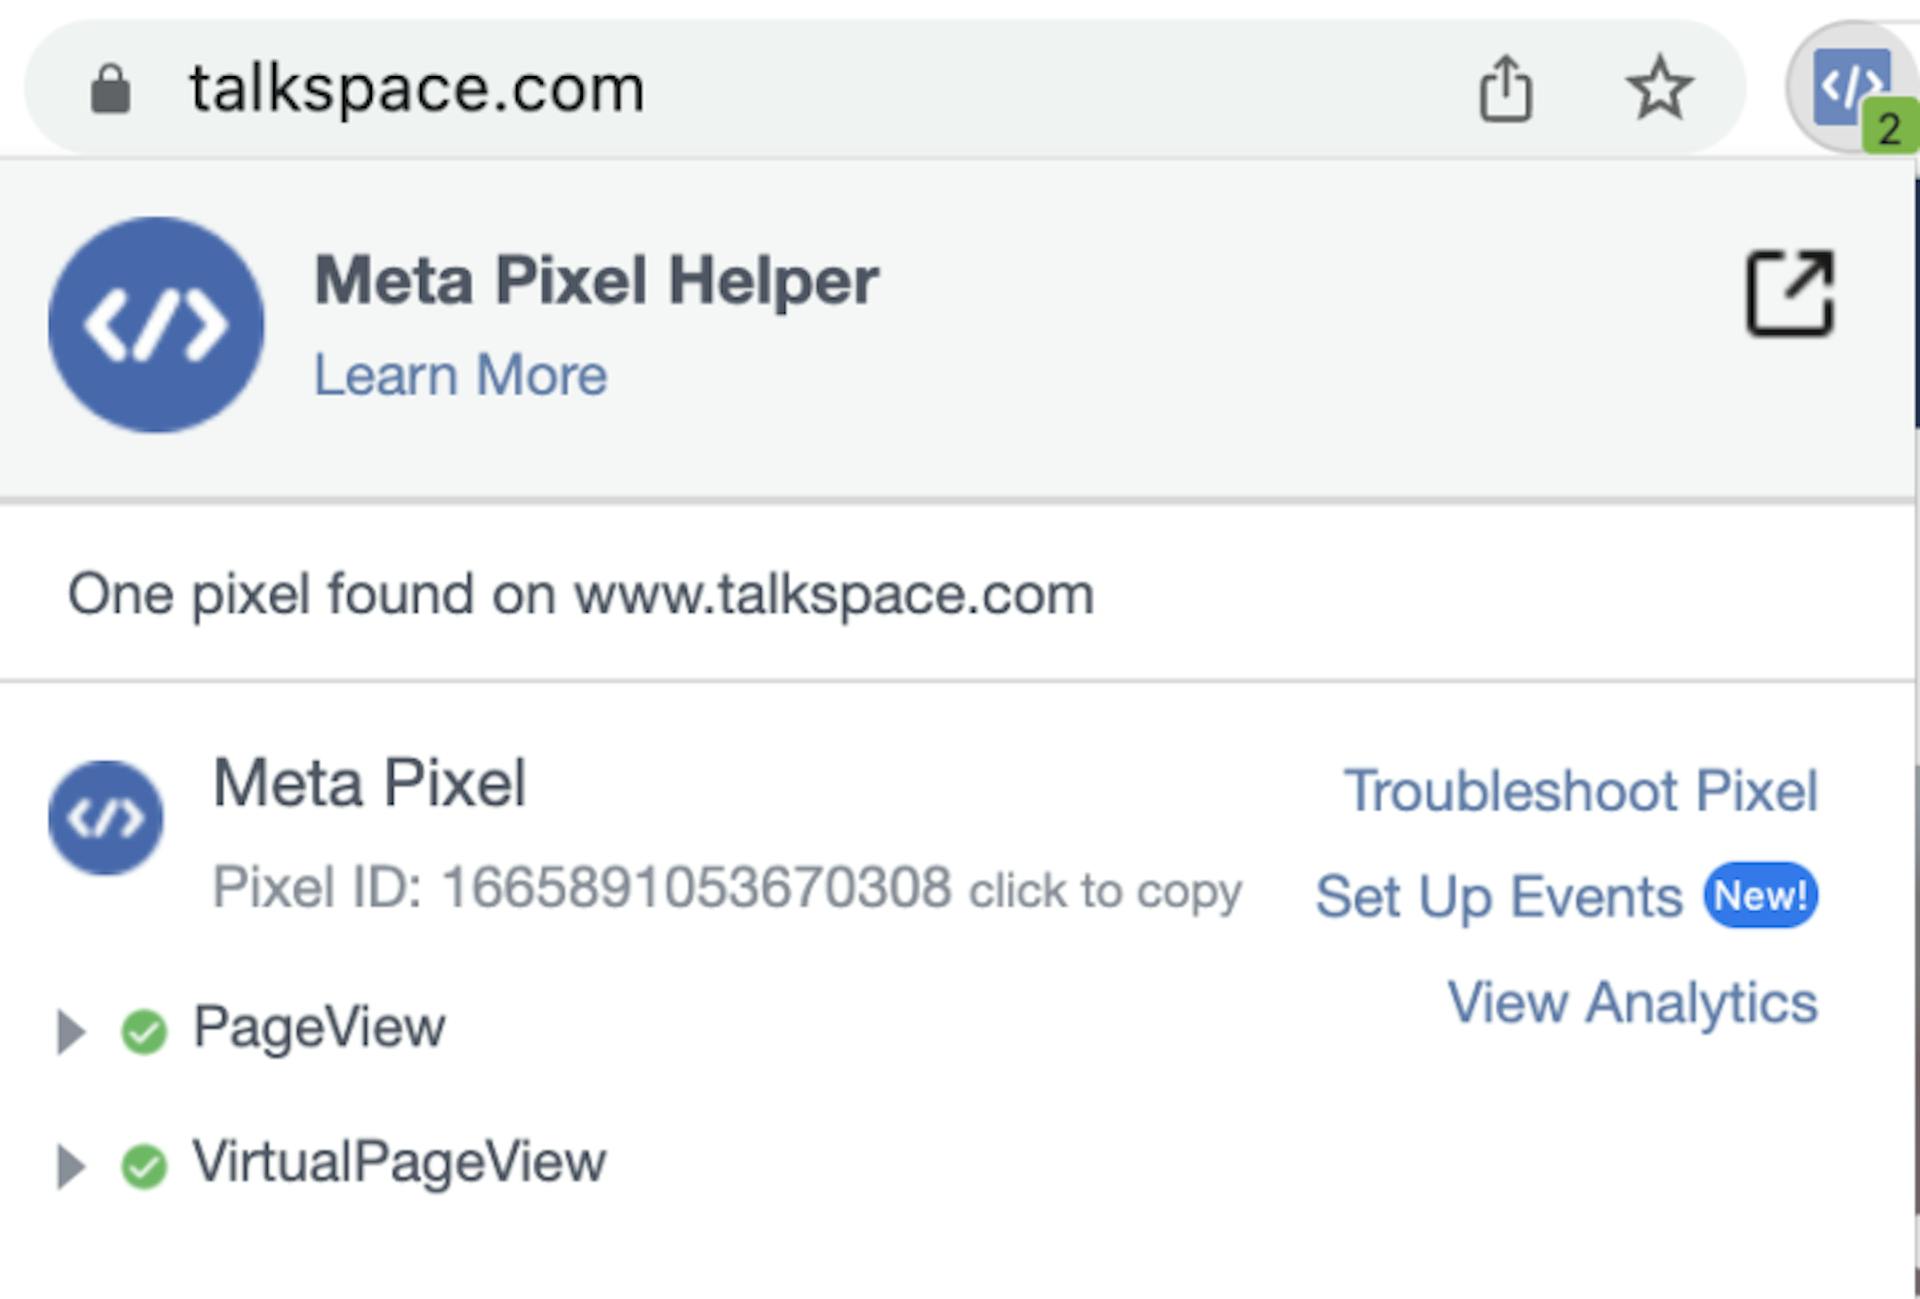 Browser extension reveals the Meta Pixel is present on the talkspace.com homepage. 